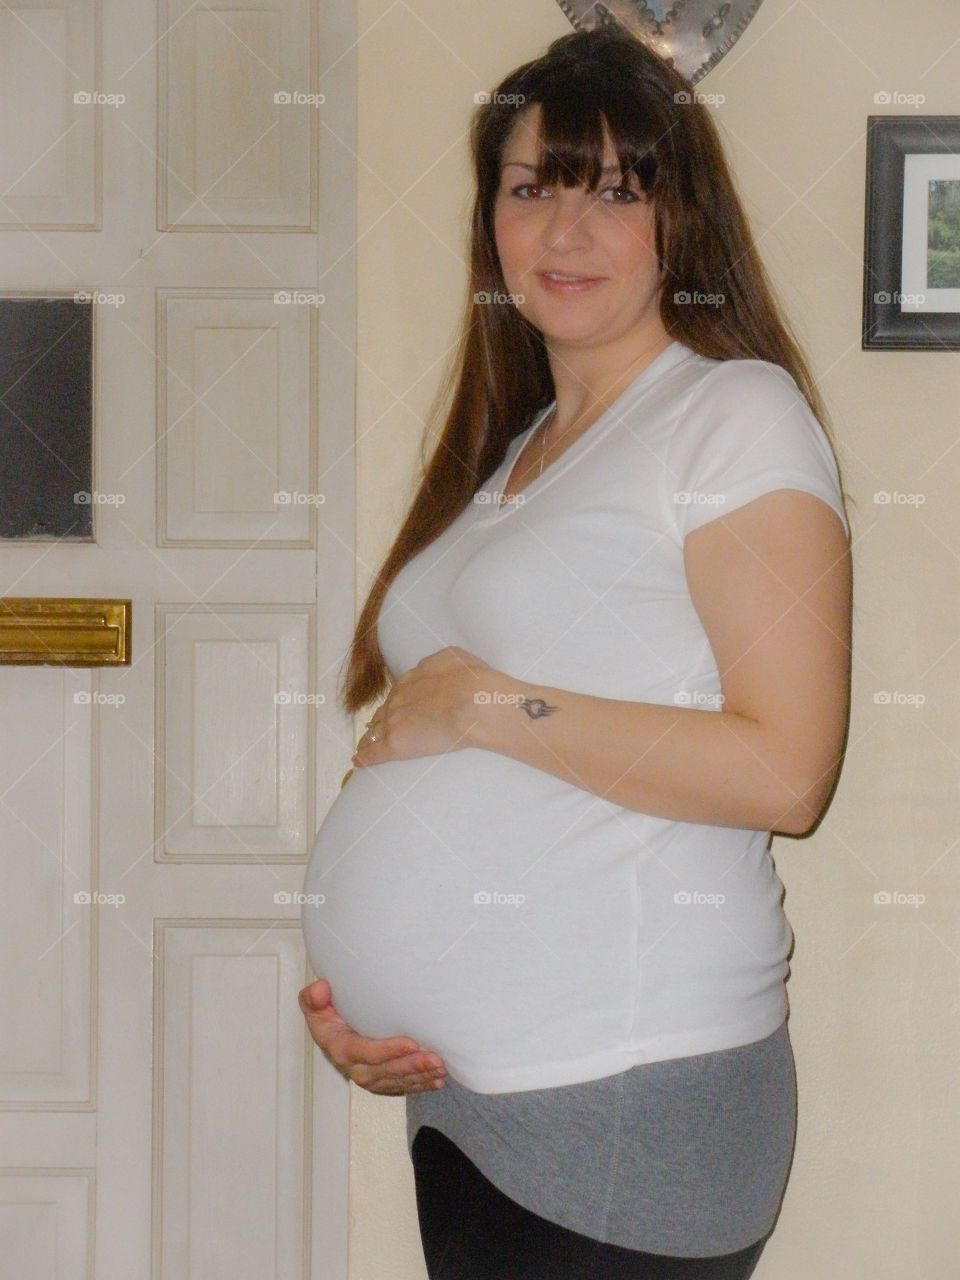 Third Trimester . Pregnant woman in the third trimester of her pregnancy, holding her baby bump, smiling. 